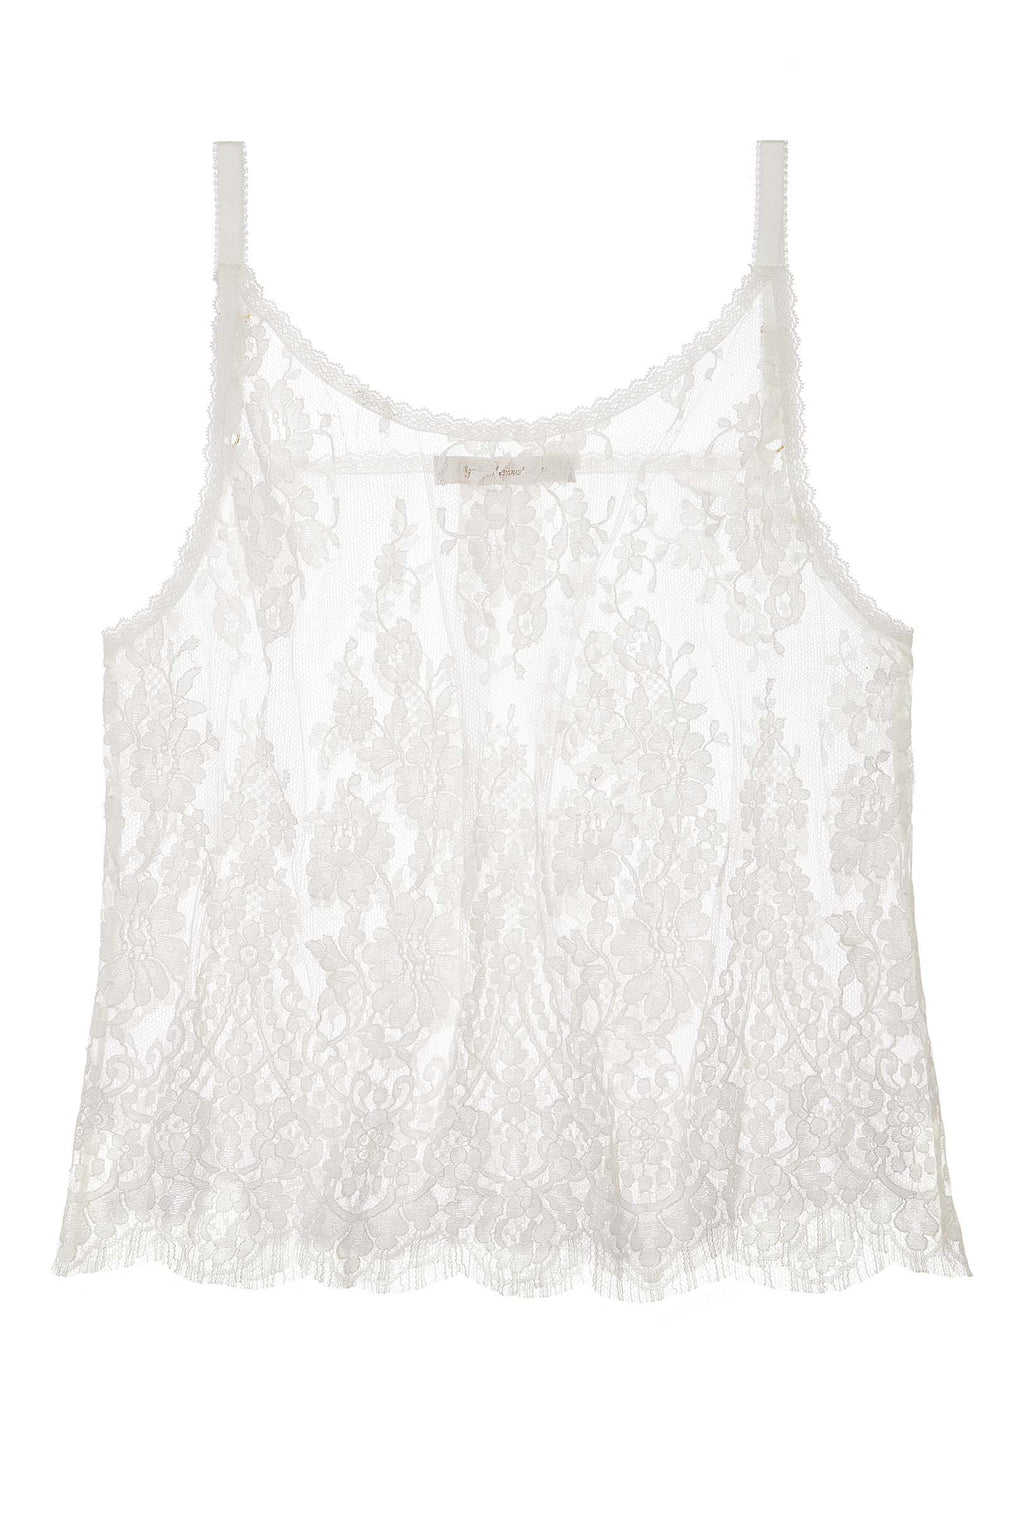 Jen French lace cami top in Ivory – GirlandaSeriousDream.com